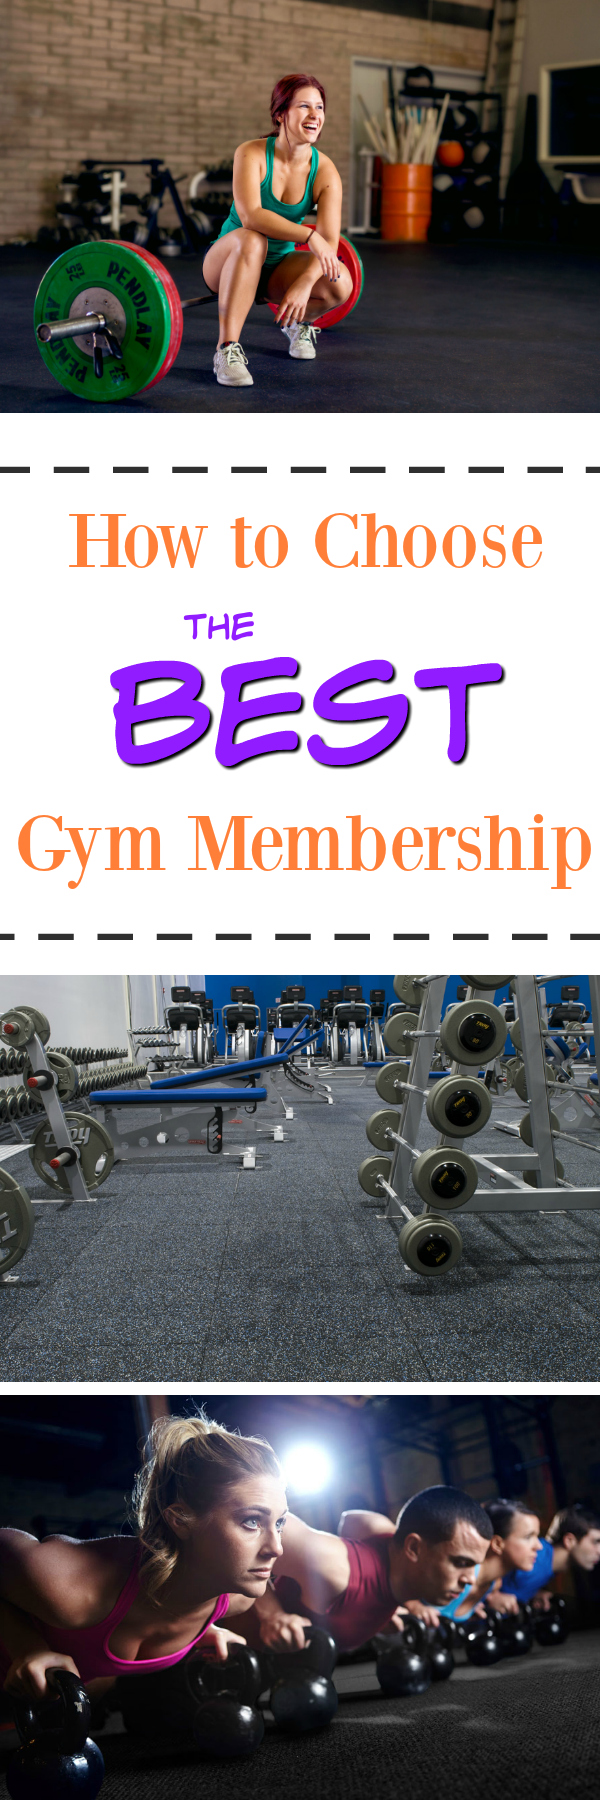 How to Choose the Best Gym Membership: Deciding where to workout can be difficult. Use this gym guide to help choose the best membership for your goals and personality.